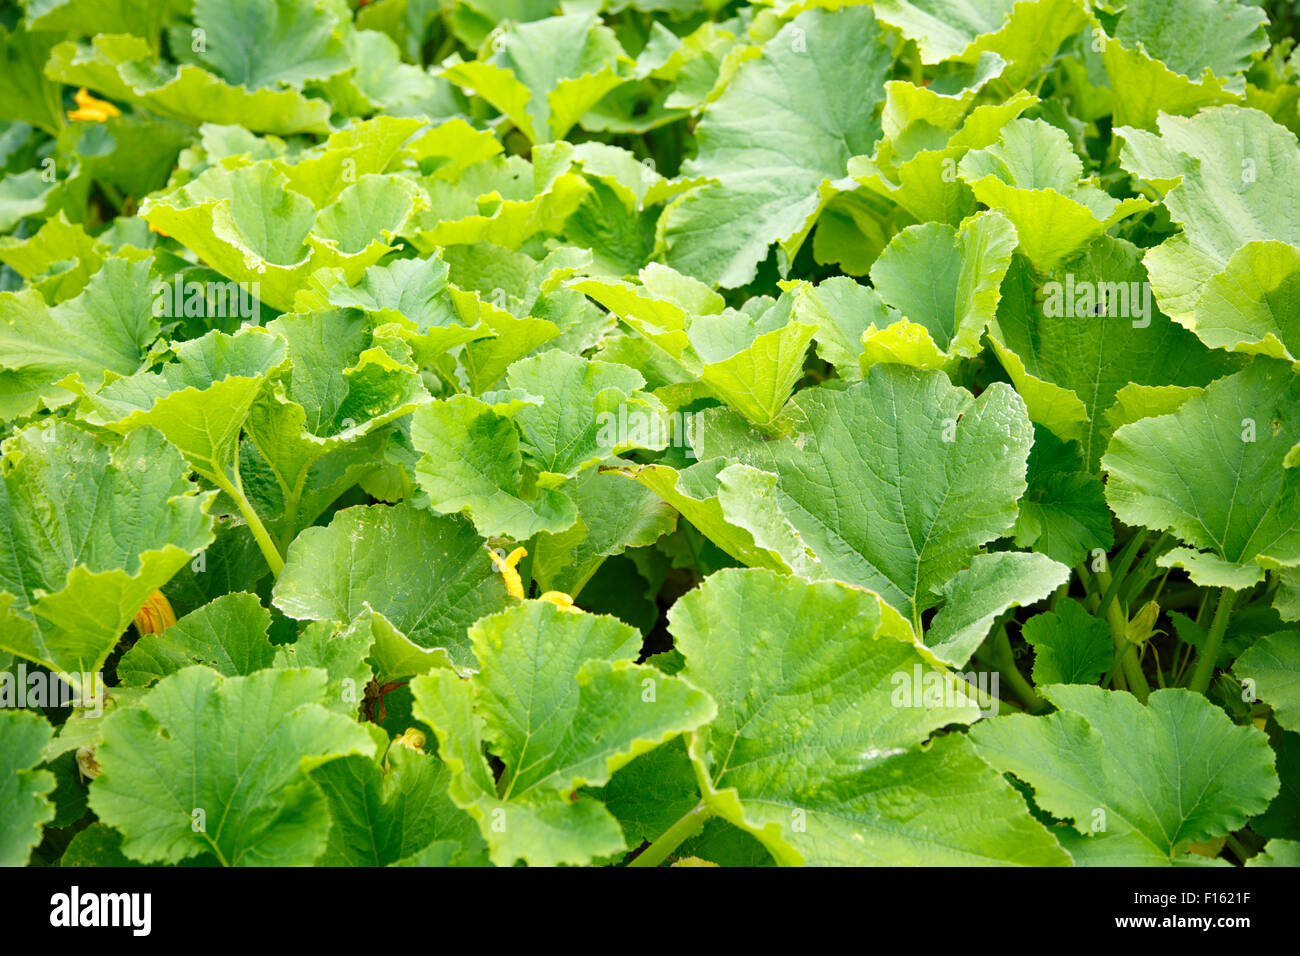 Green field of growing marrow tops as background Stock Photo